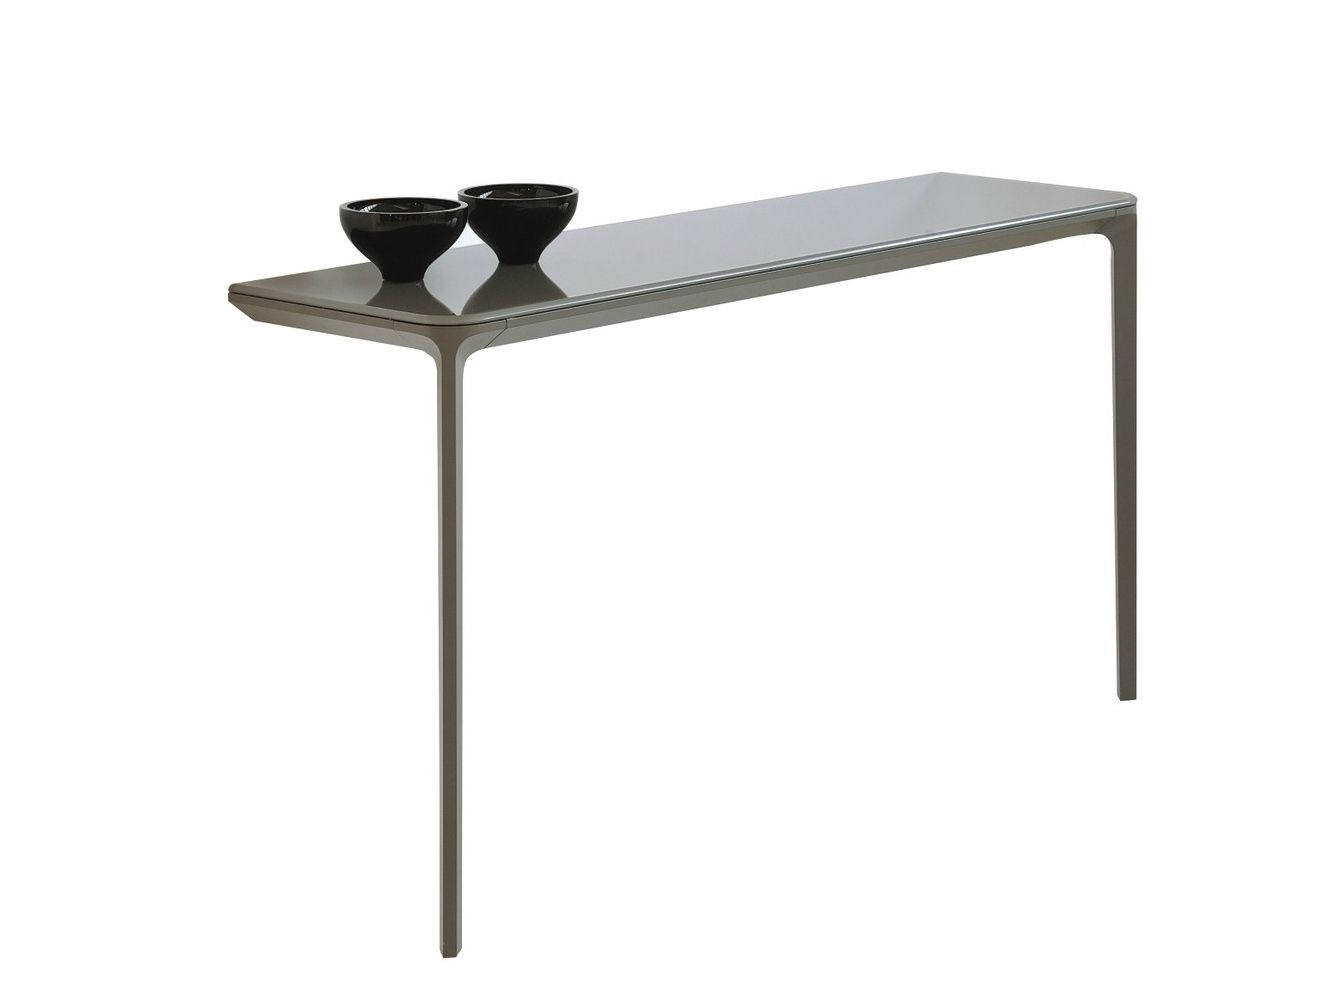 Rectangular Glass Console Table Slim 2 Legssovet Italia Design Throughout Rectangular Glass Top Console Tables (View 2 of 20)